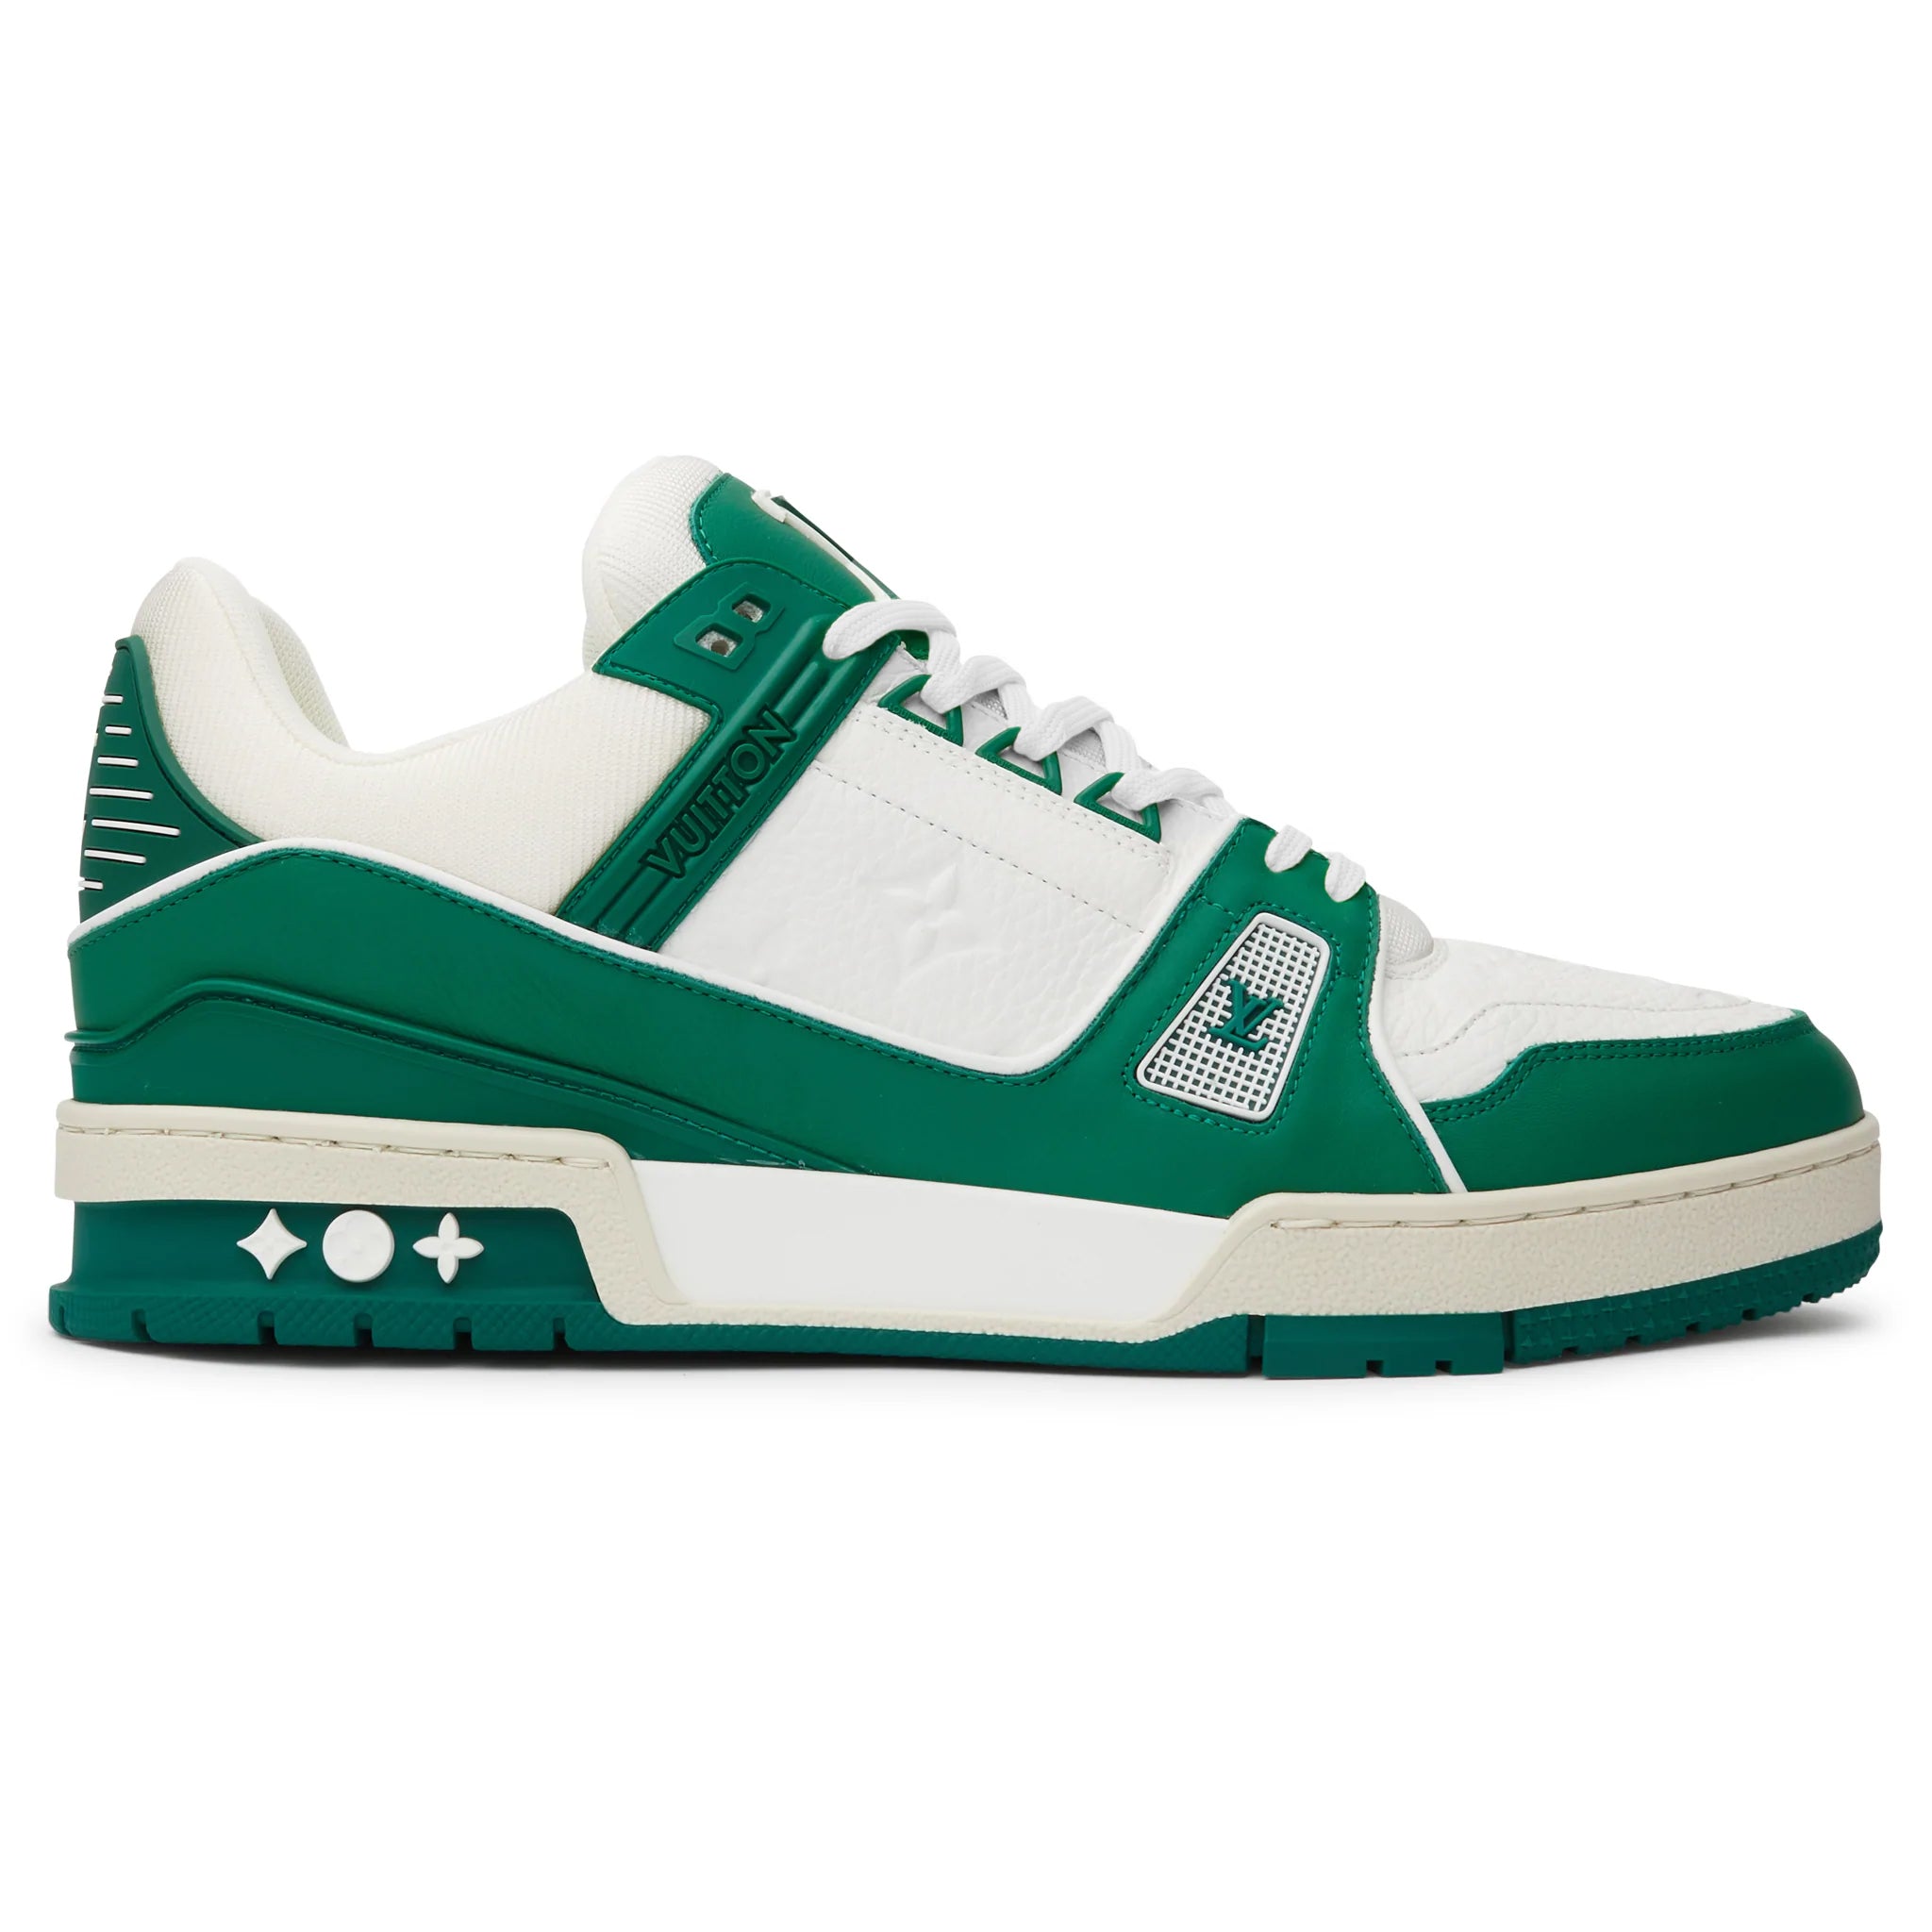 Lv trainer leather high trainers Louis Vuitton Green size 9 UK in